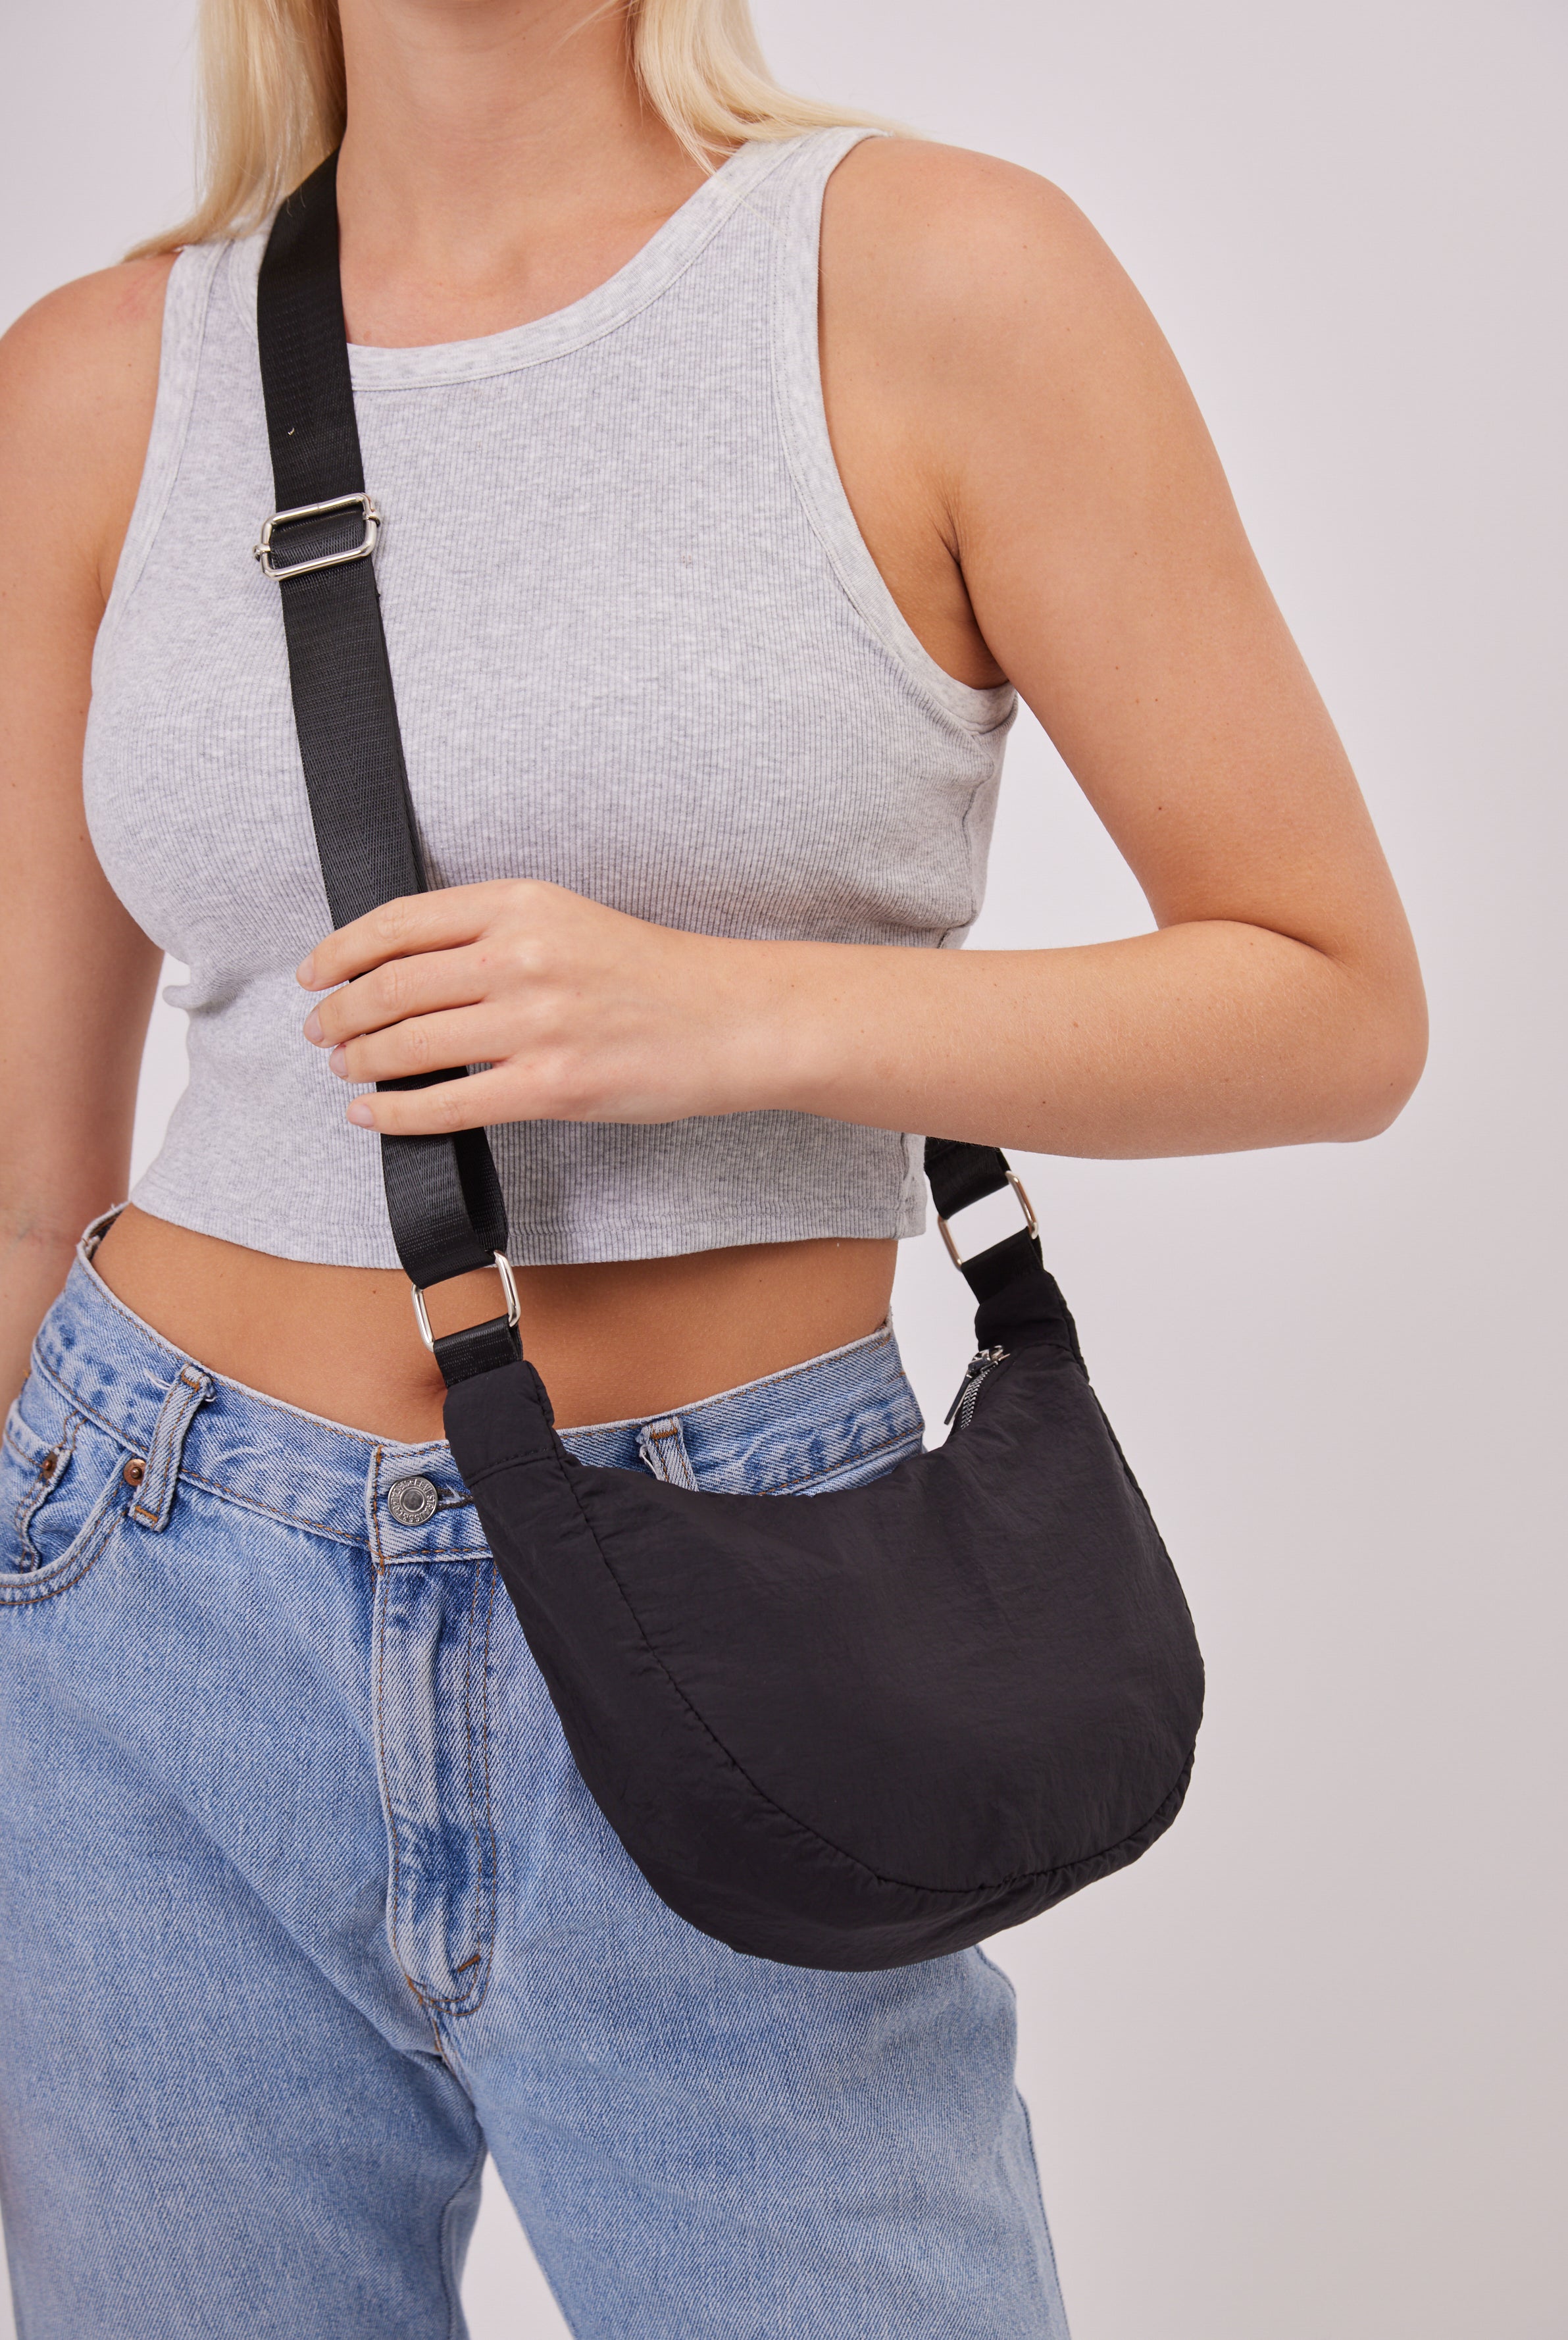 Nylon Sling Bag in Black | minimal | streetwear | street style | women's accessories | casual | sling bag | crossbody | accessories | accessory | basics | unisex | corpcore | quiet luxury | clean girl | utility